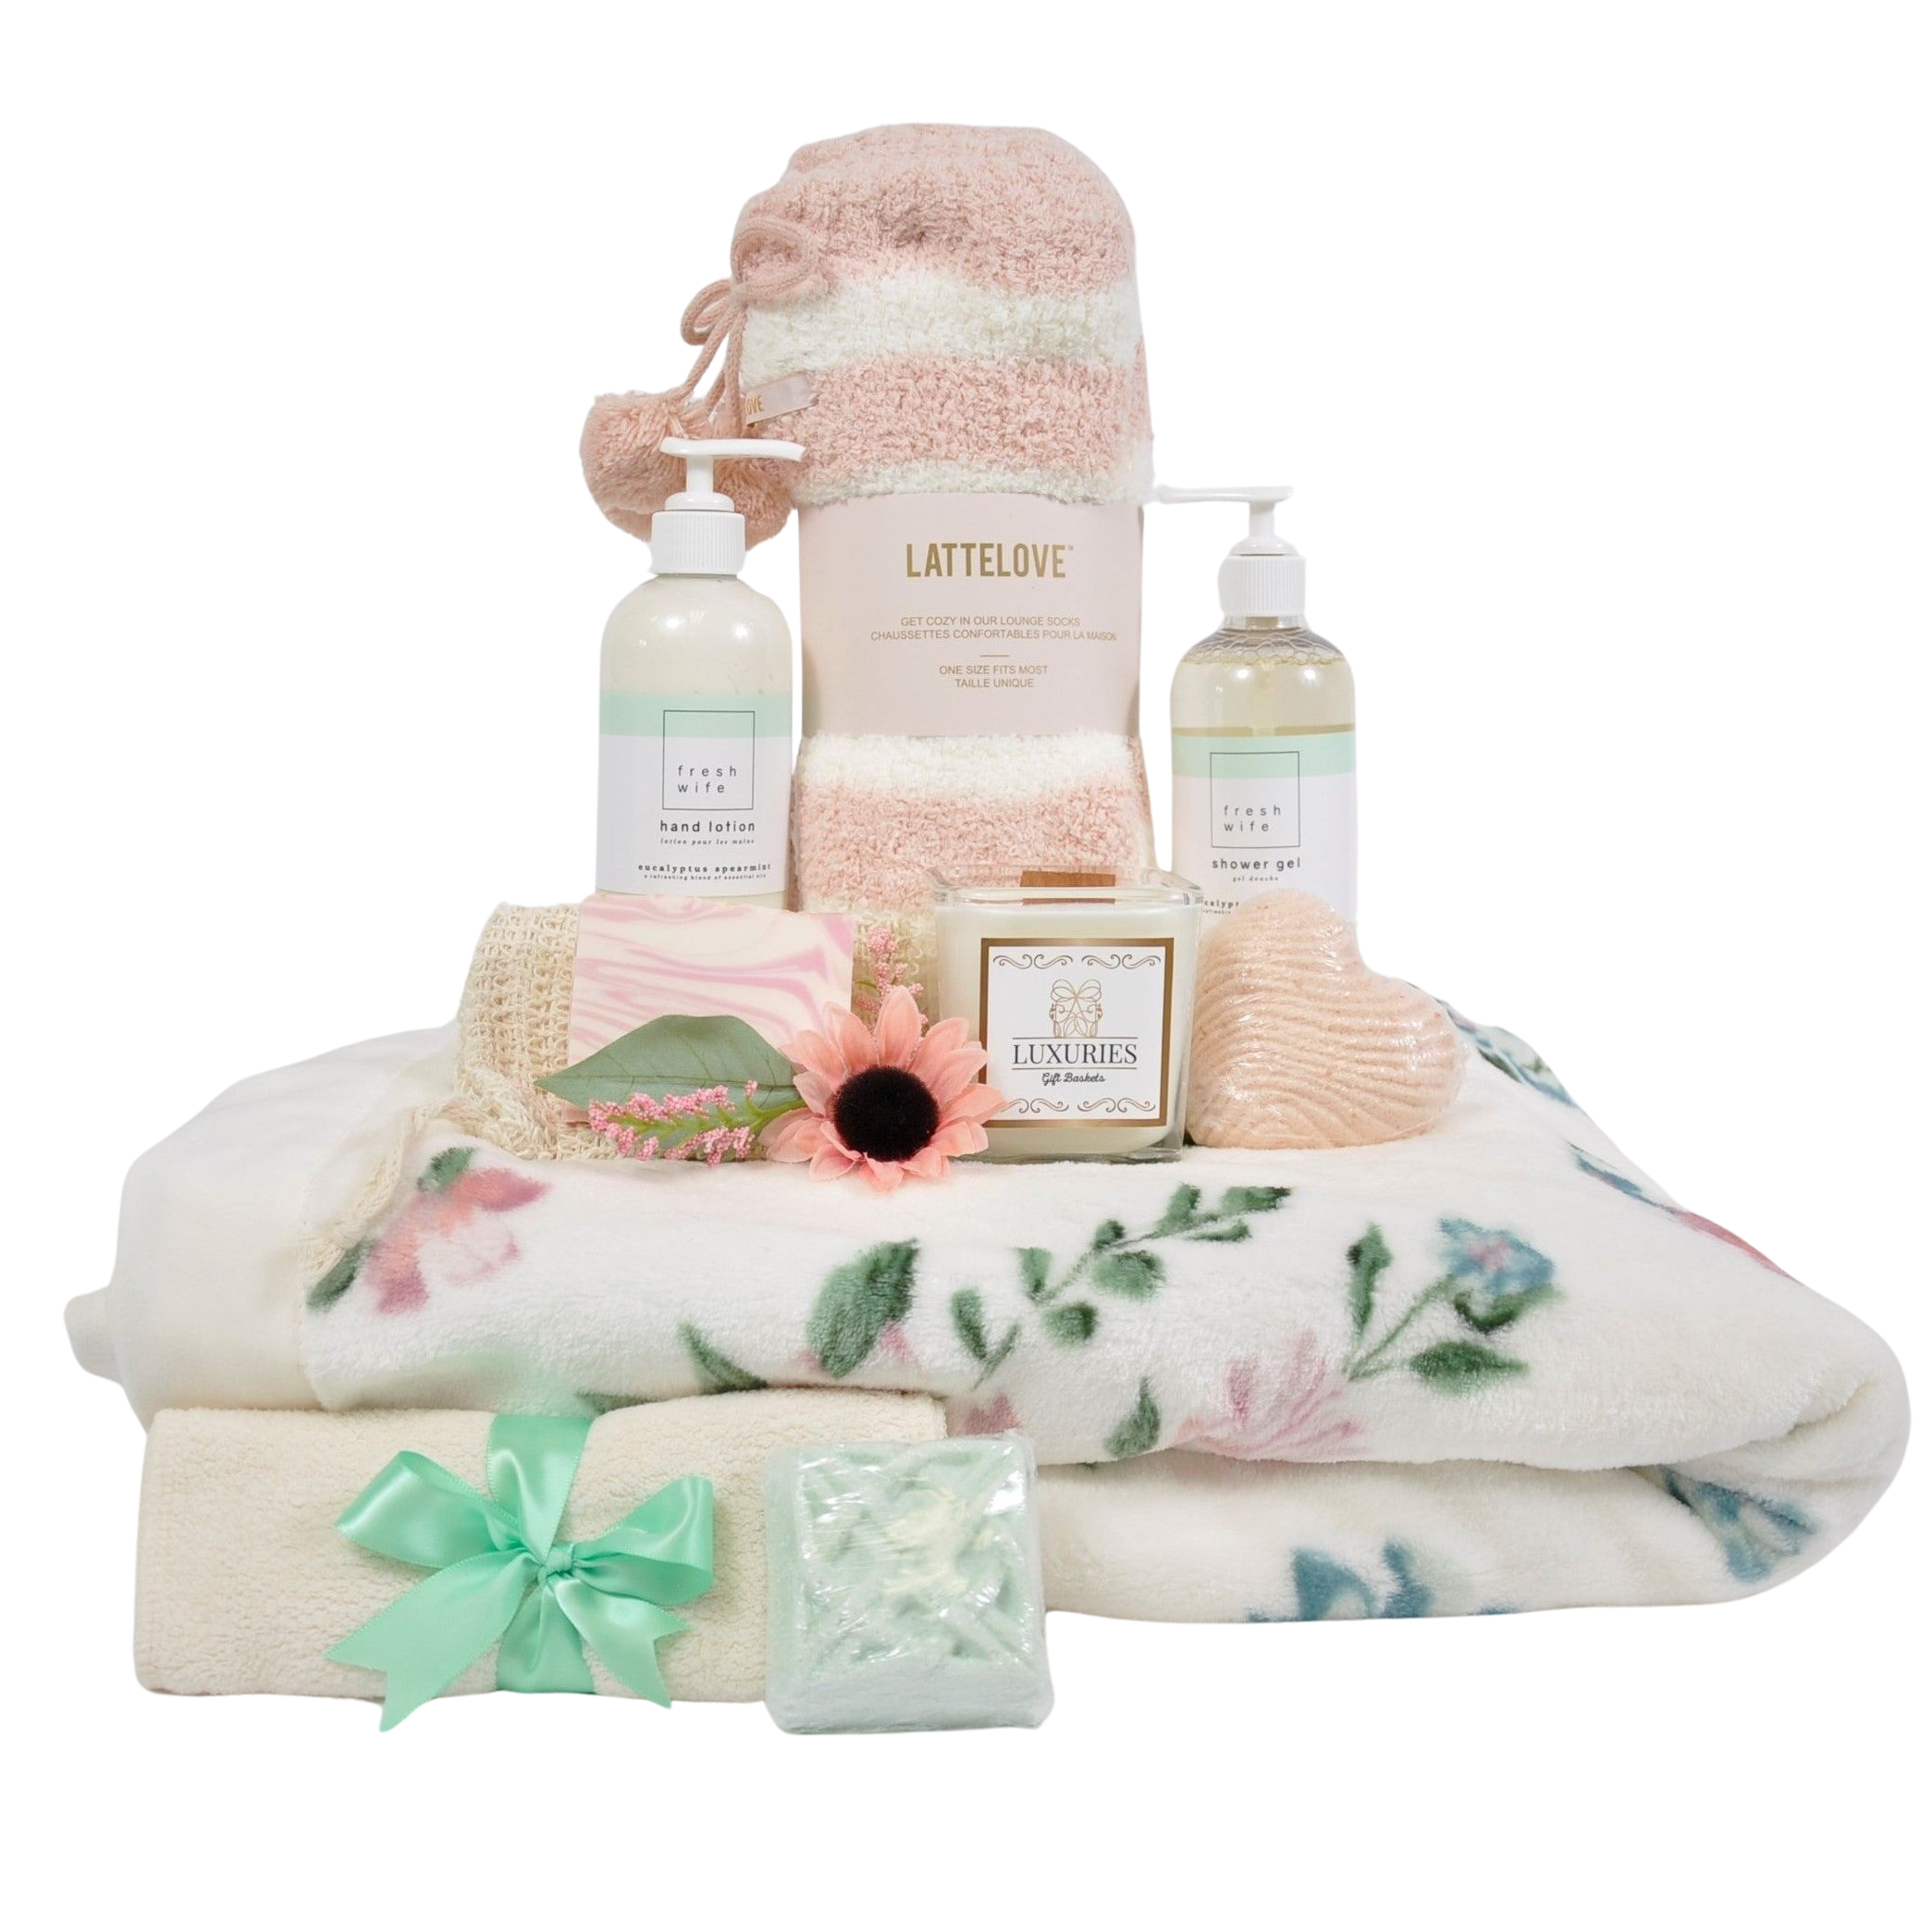 16 Exciting Women's Gift Baskets She Really Wants – Shadow Breeze